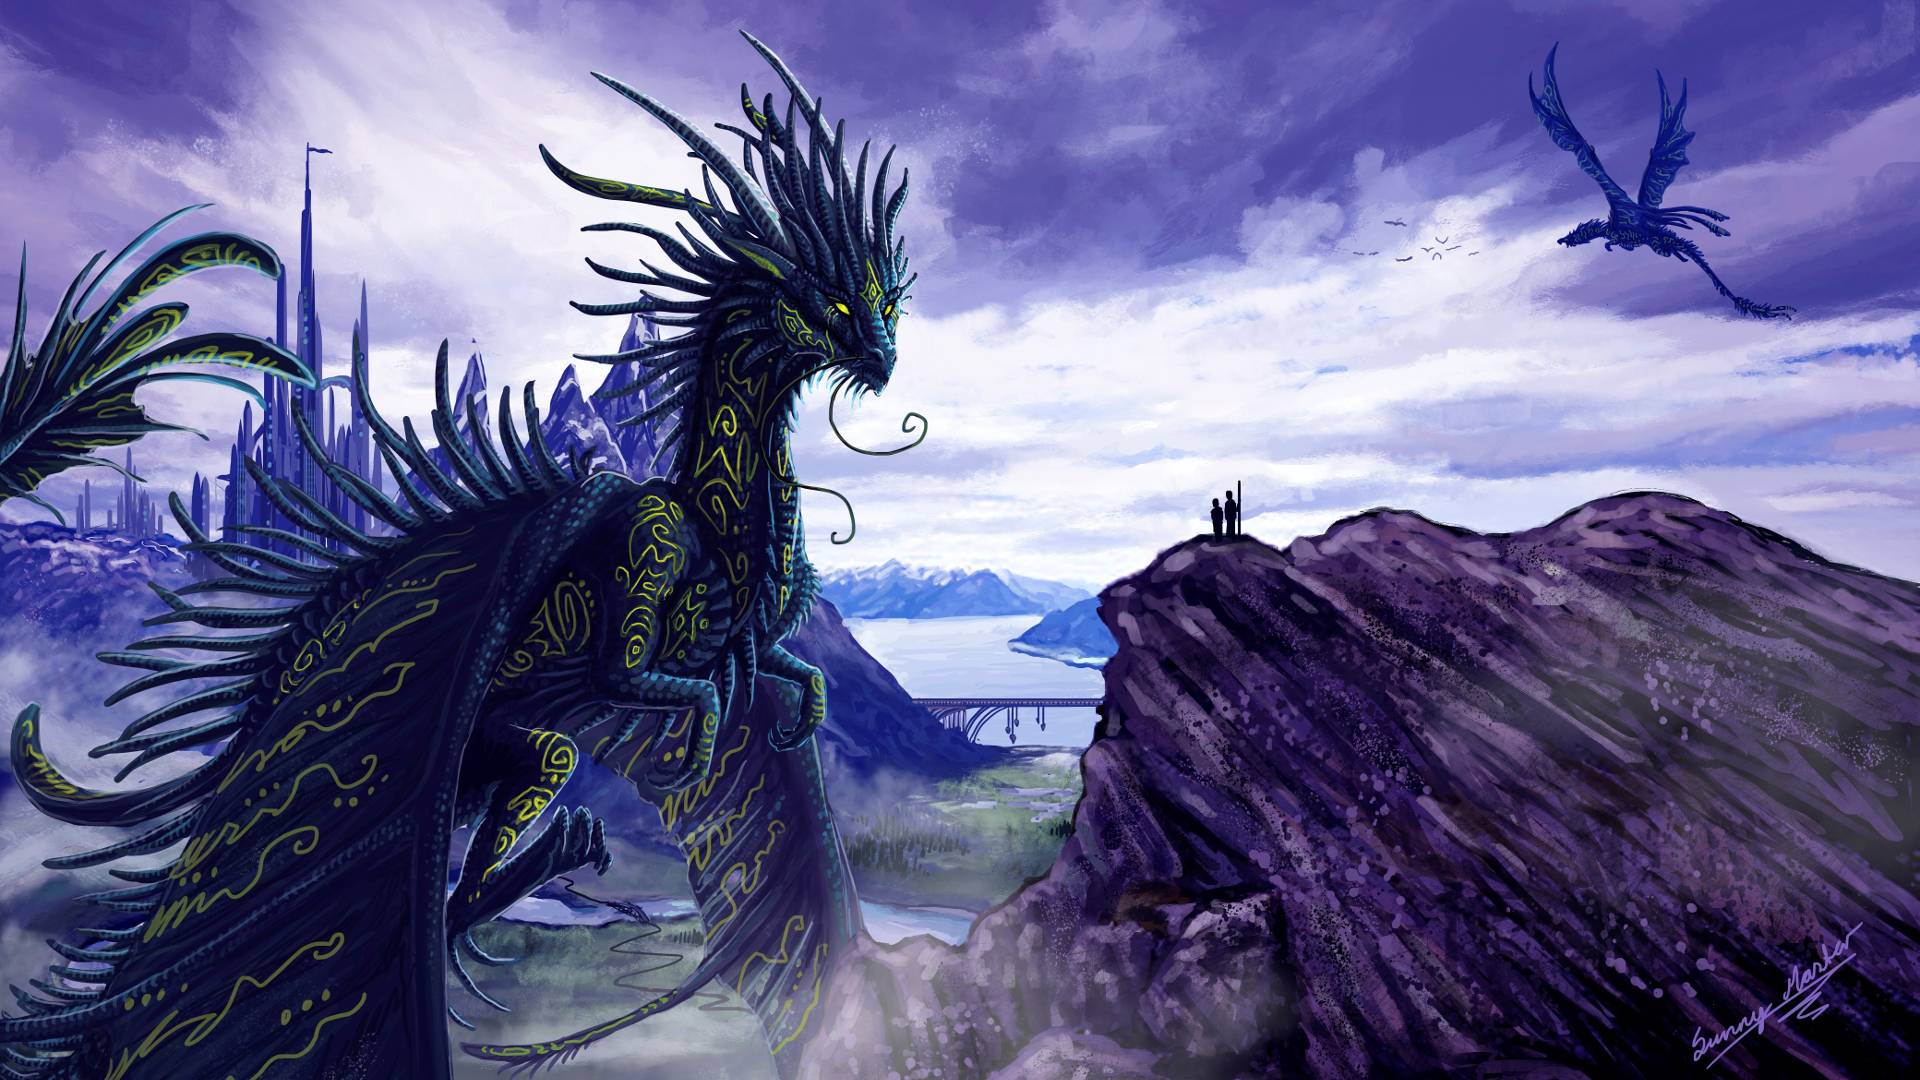 Cool Dragon Backgrounds For Computers That Move